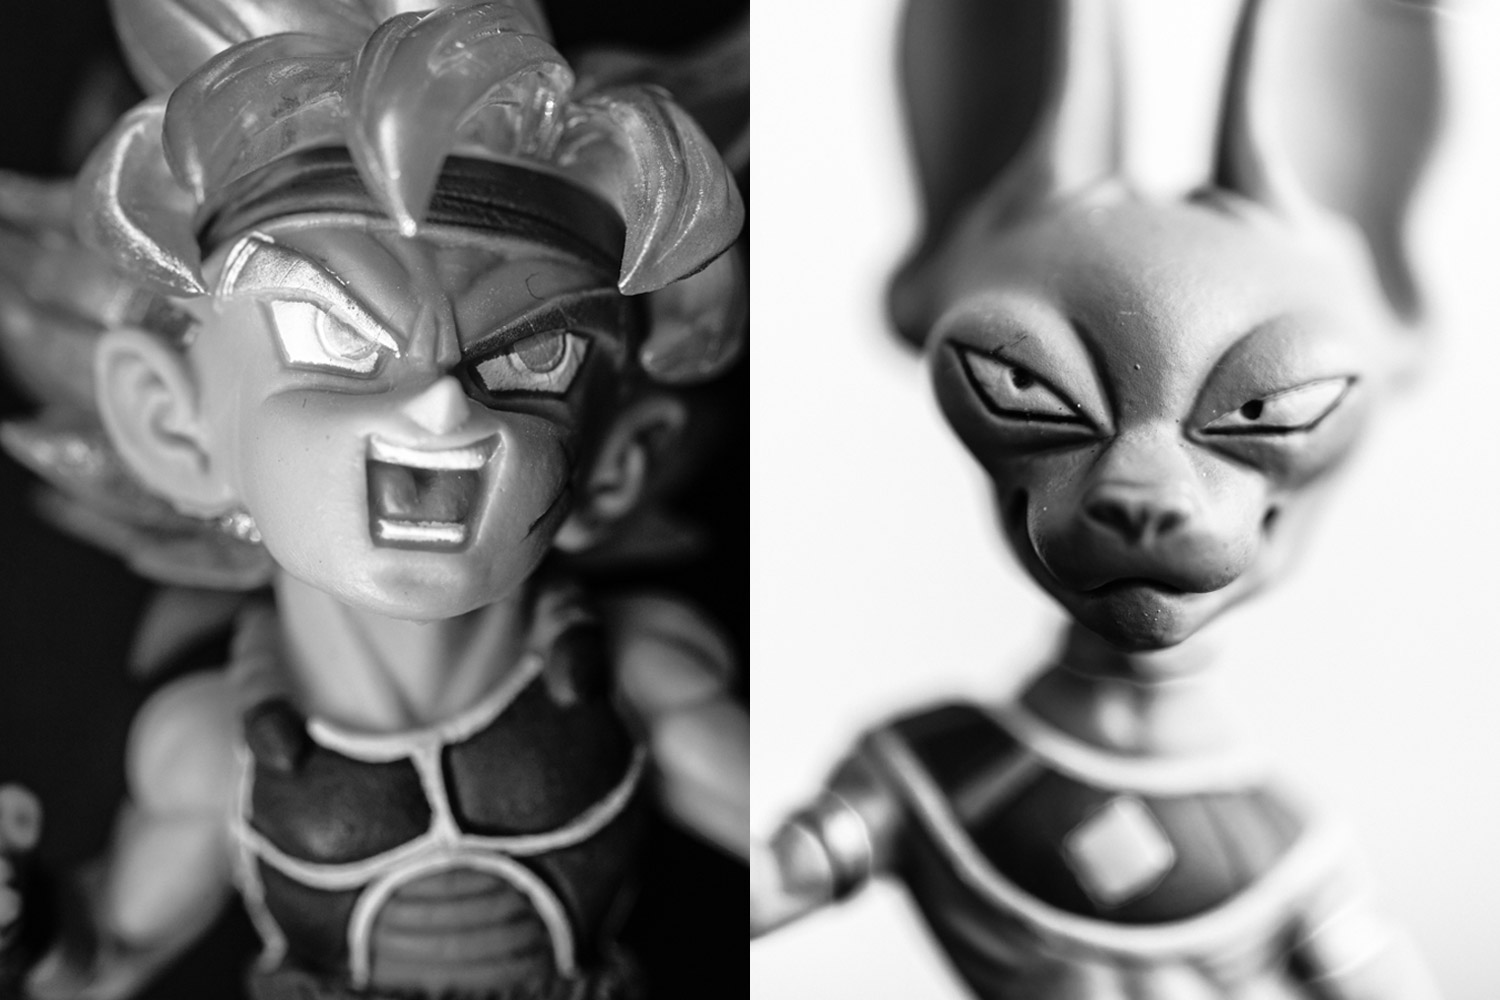 Dragon Ball Z characters Super Saiyan and Beerus posed for black and white portraits